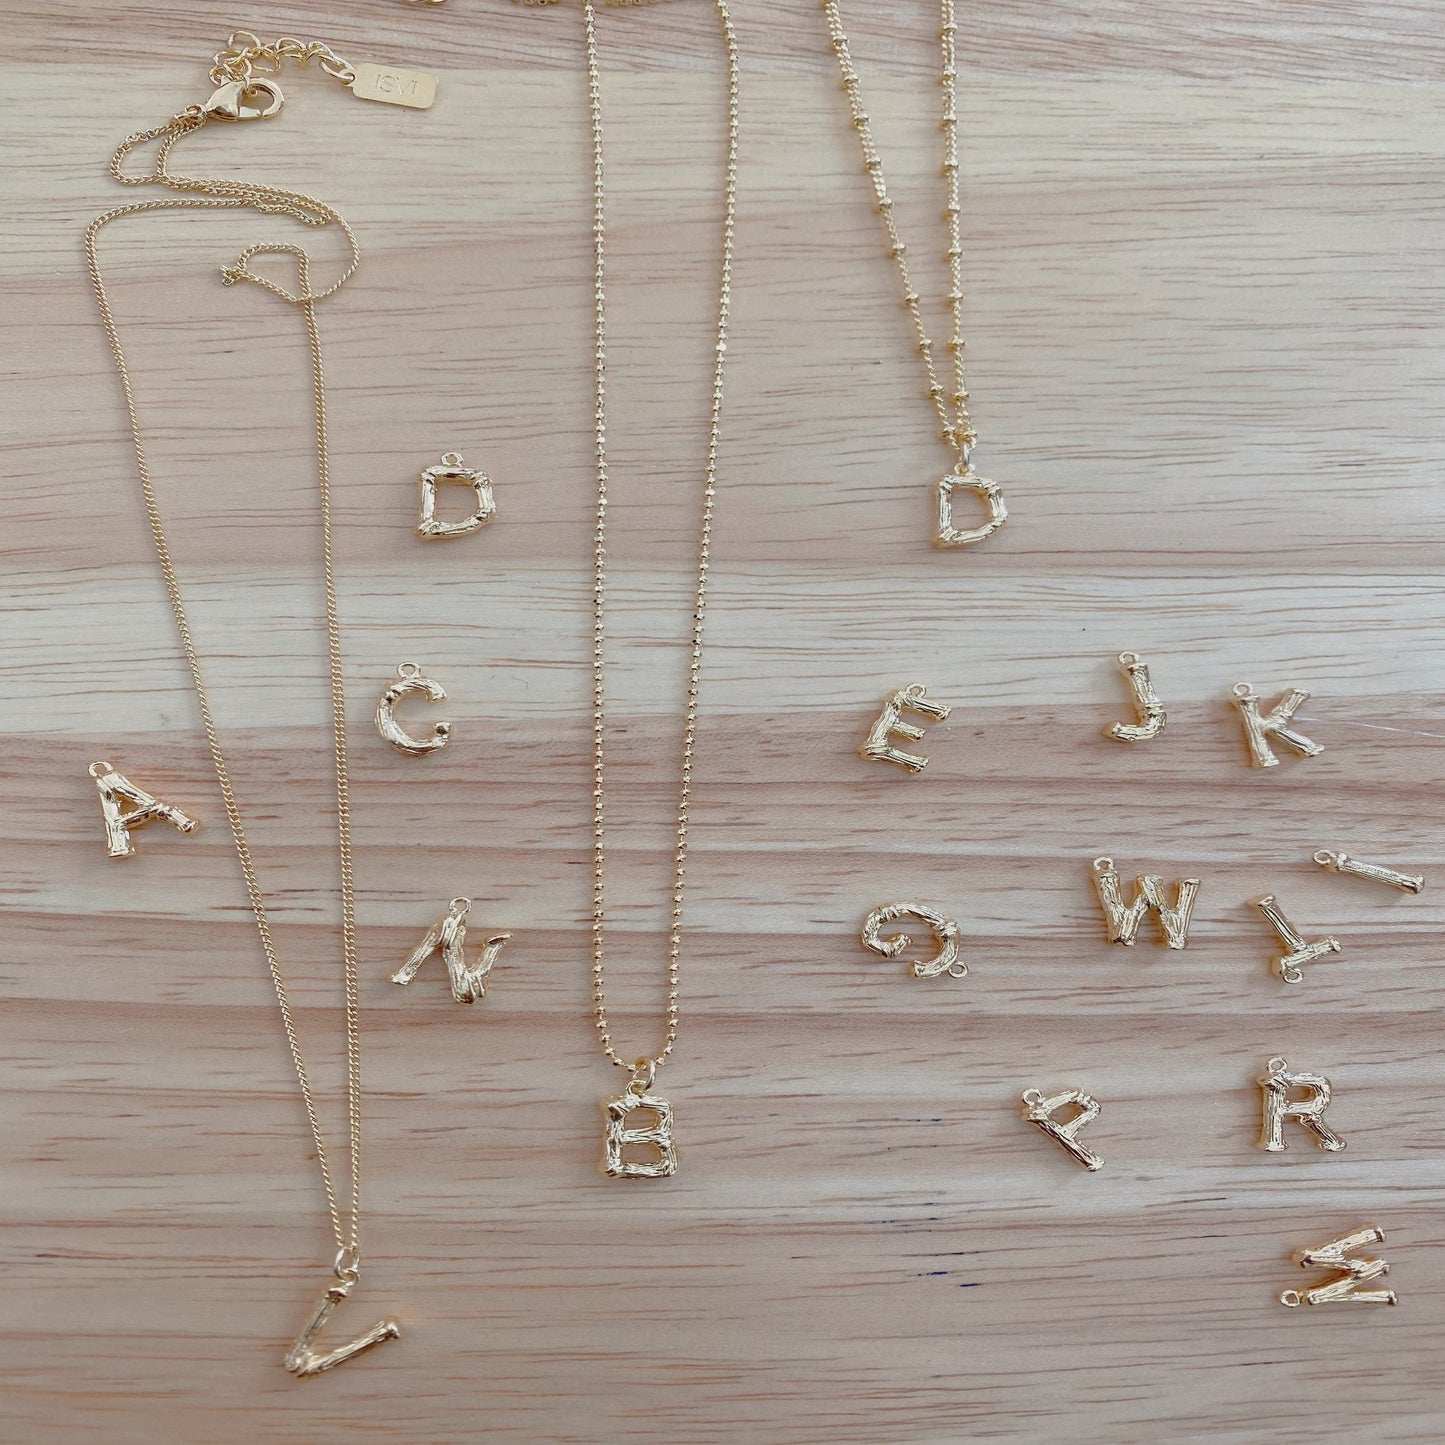 Little “bamboo” initial necklace